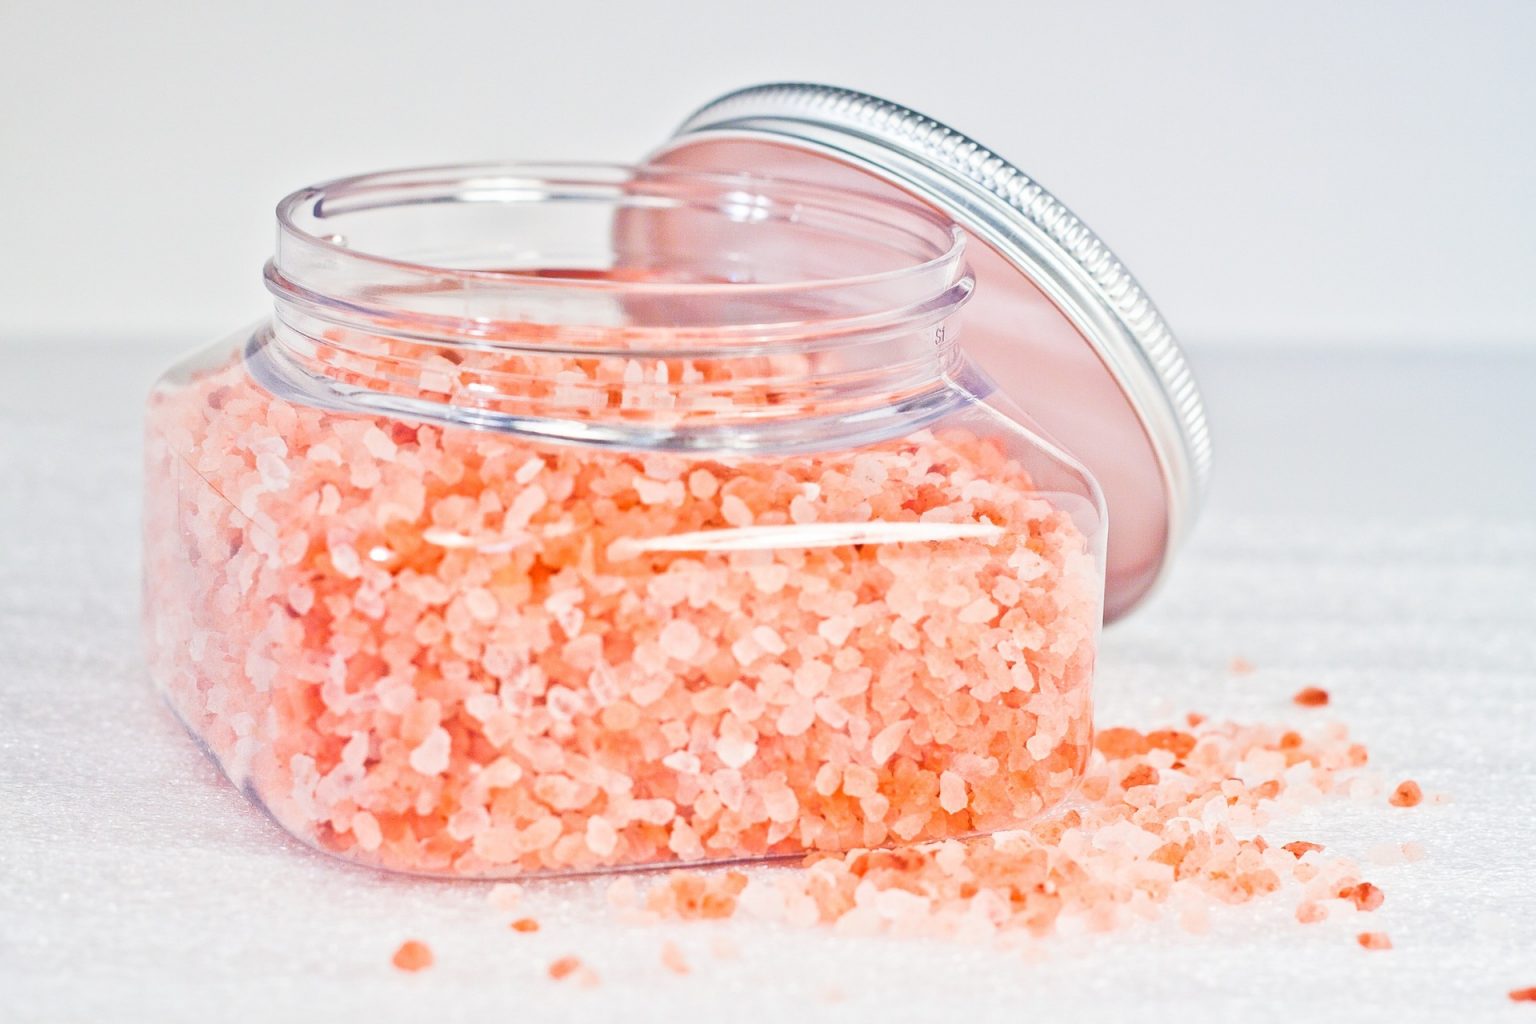 Possessing And Selling ‘Bath Salts’ in NH is Now a Crime